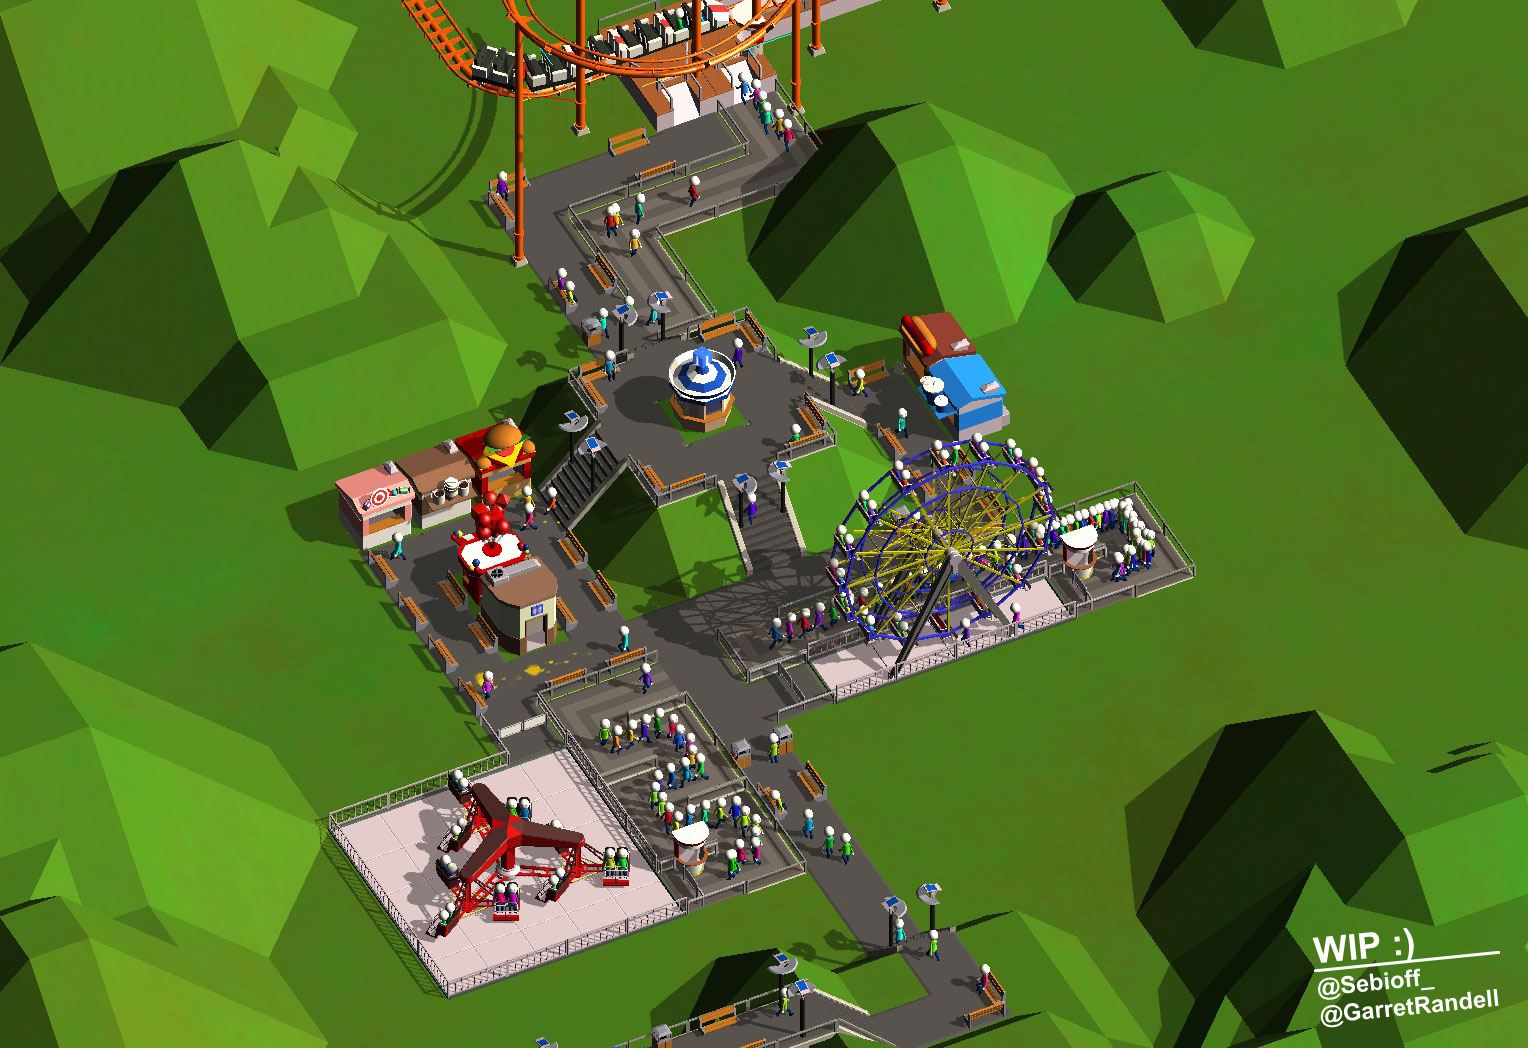 Is This Indie Game the next RollerCoaster Tycoon?